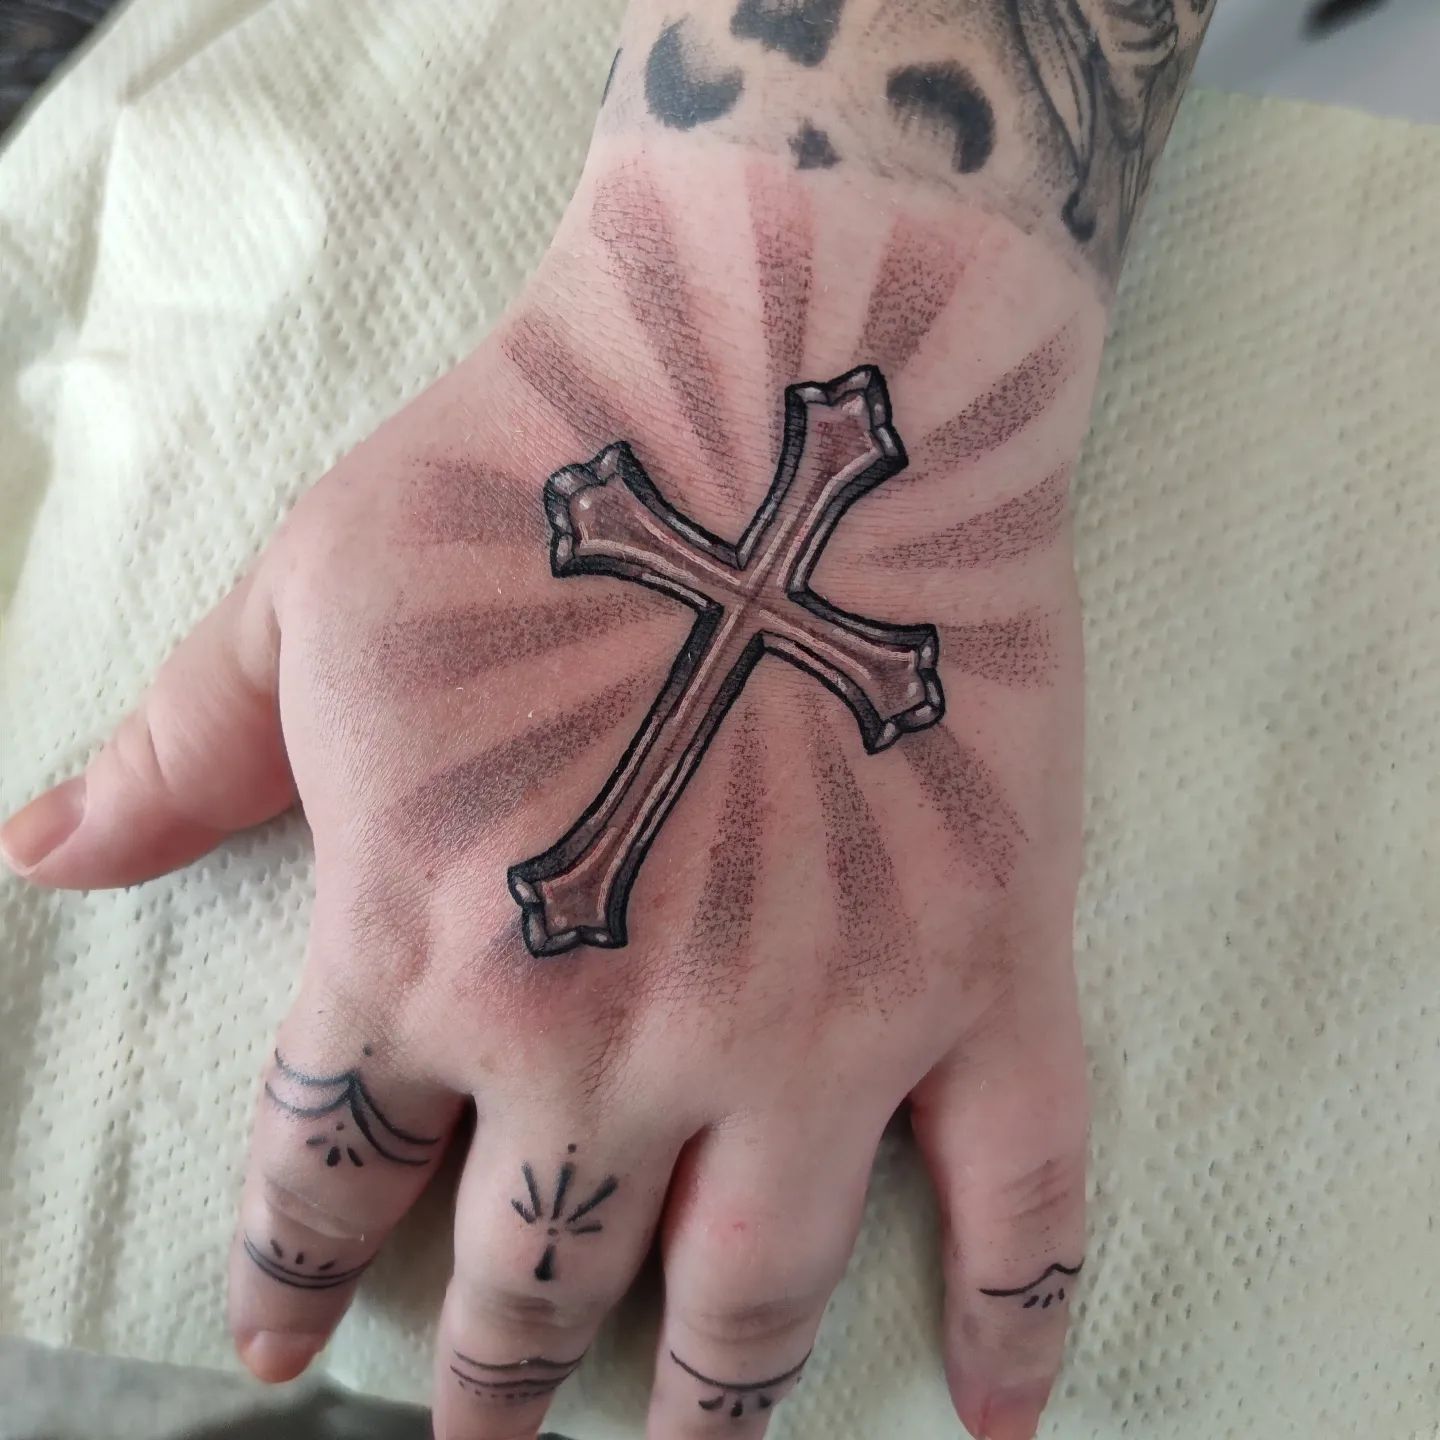 Hand tattoos are those who are bold since it is a part of the body that is most seen. In this tattoo, a relatively big cross is used. Can you spot these white thin lines inside of it? They make the cross gorgeous as well as the light shades behind it.